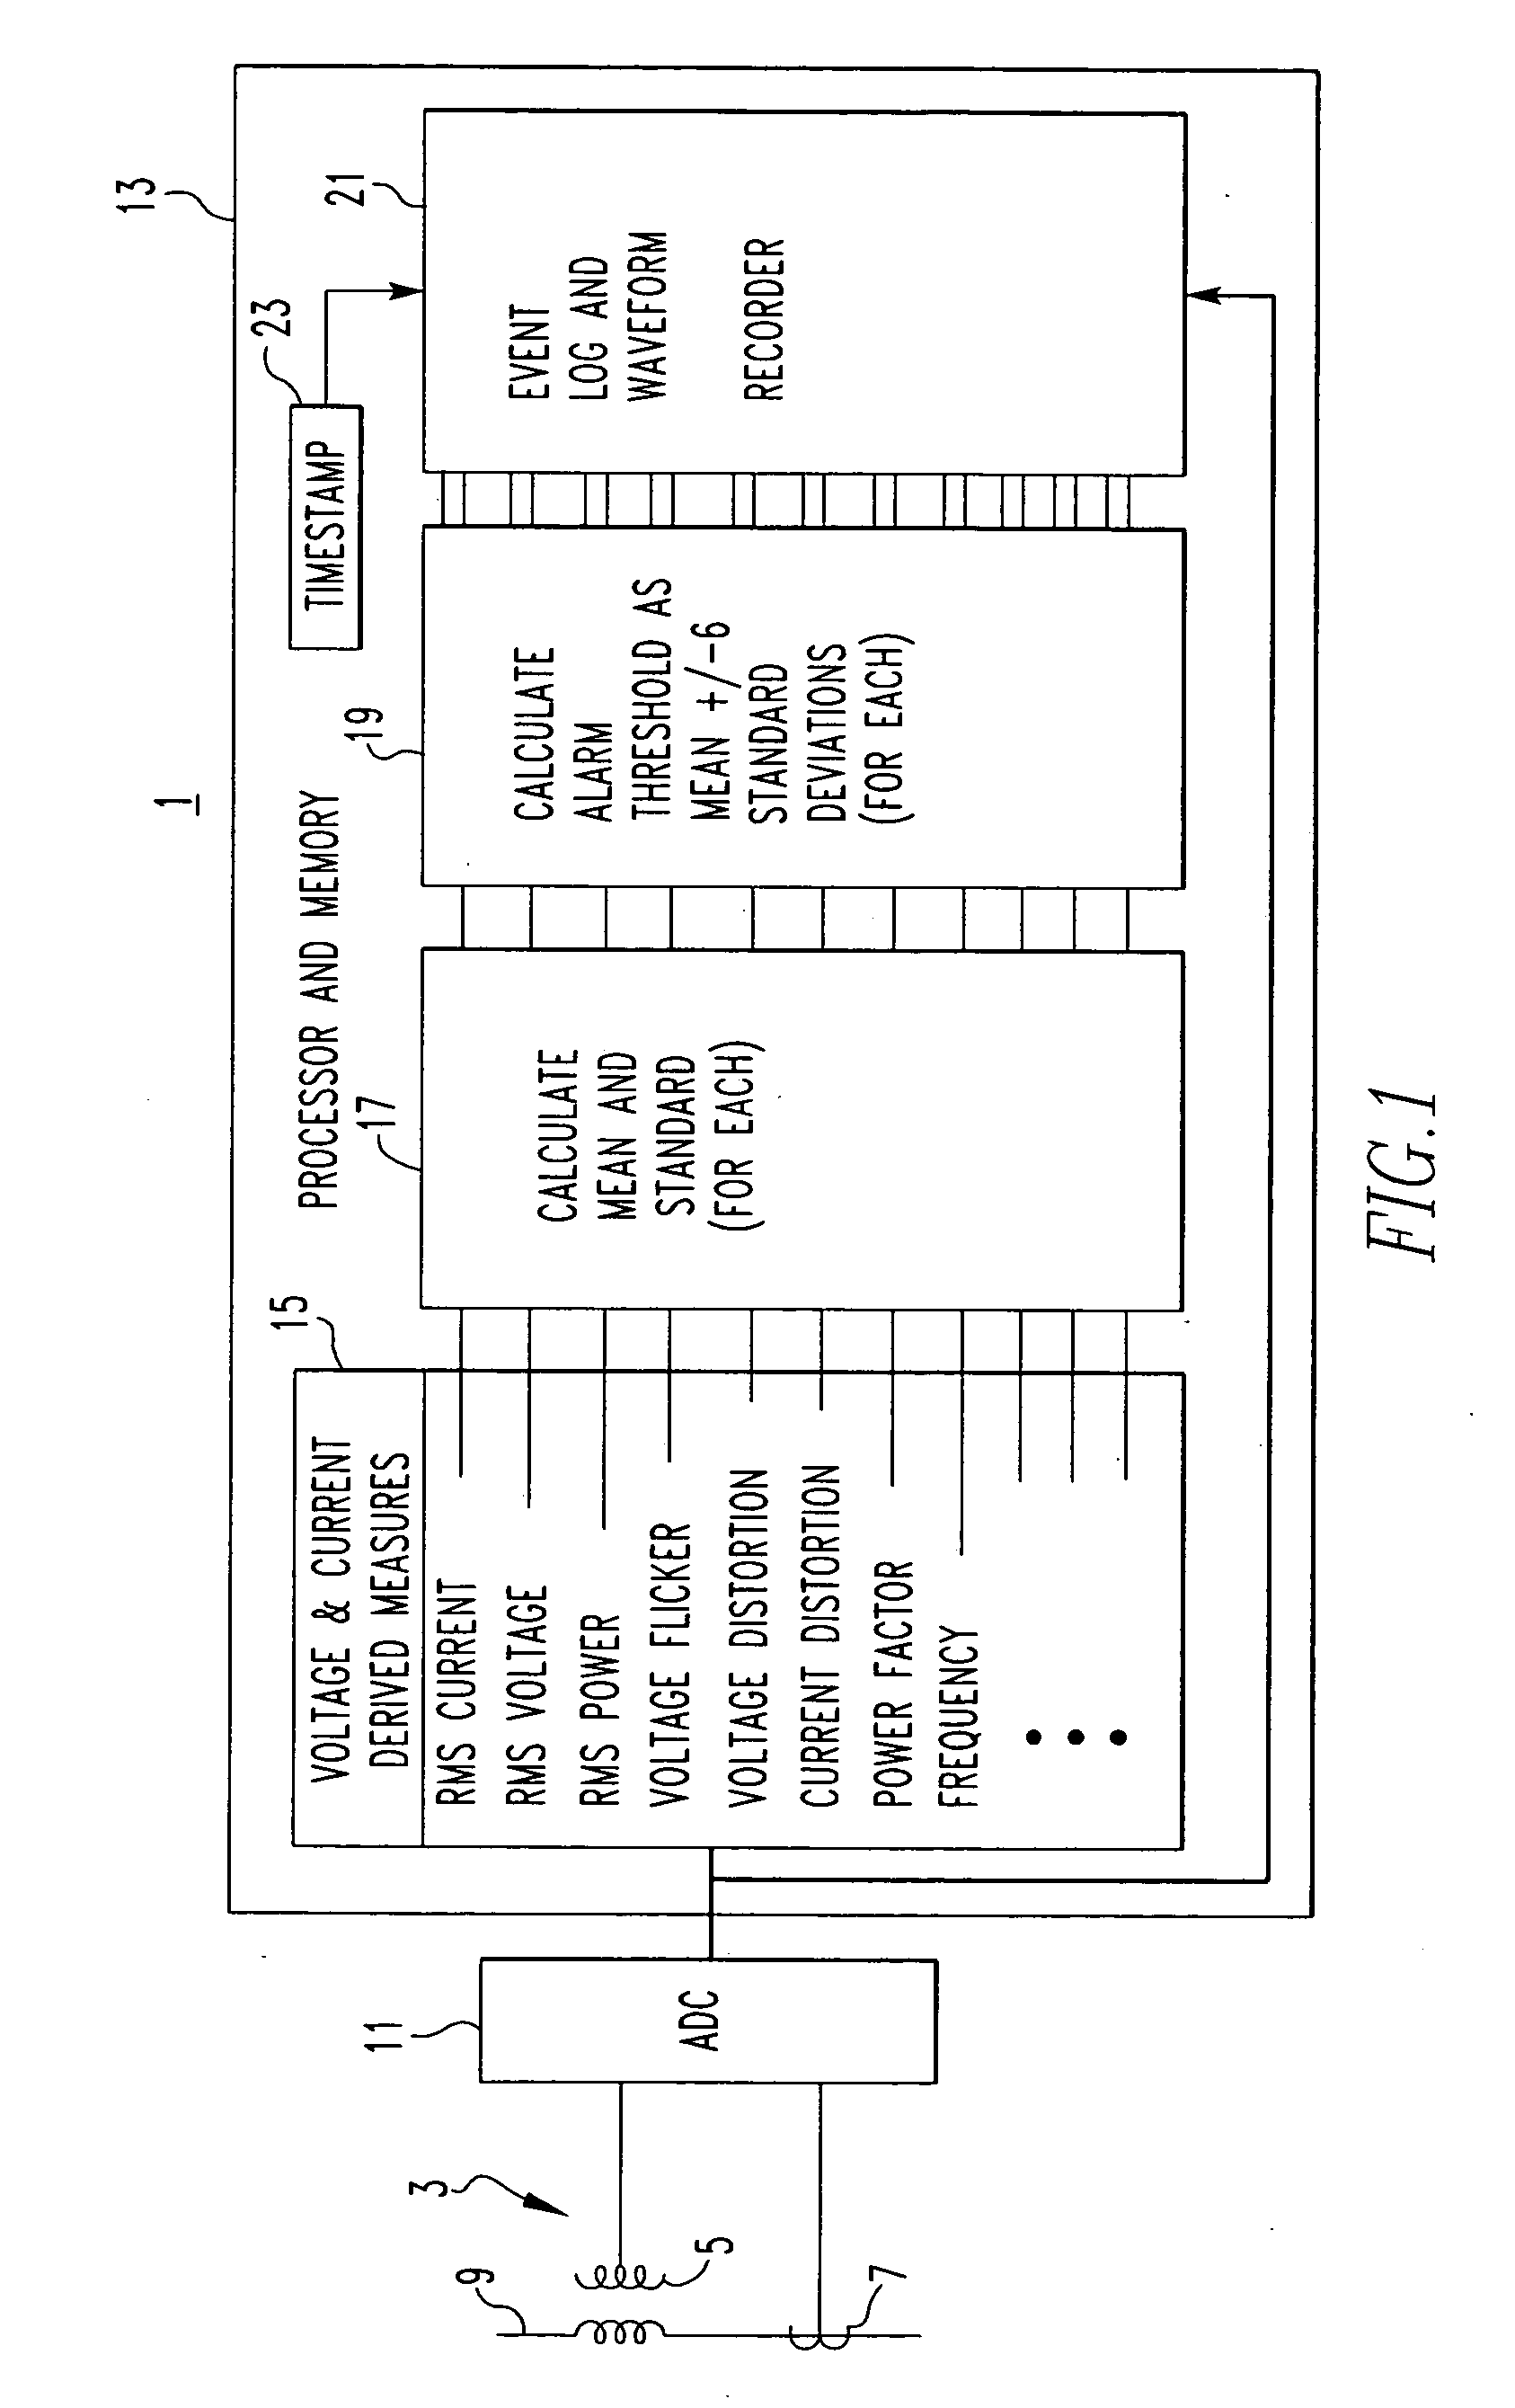 Statistical method and apparatus for monitoring parameters in an electric power distribution system